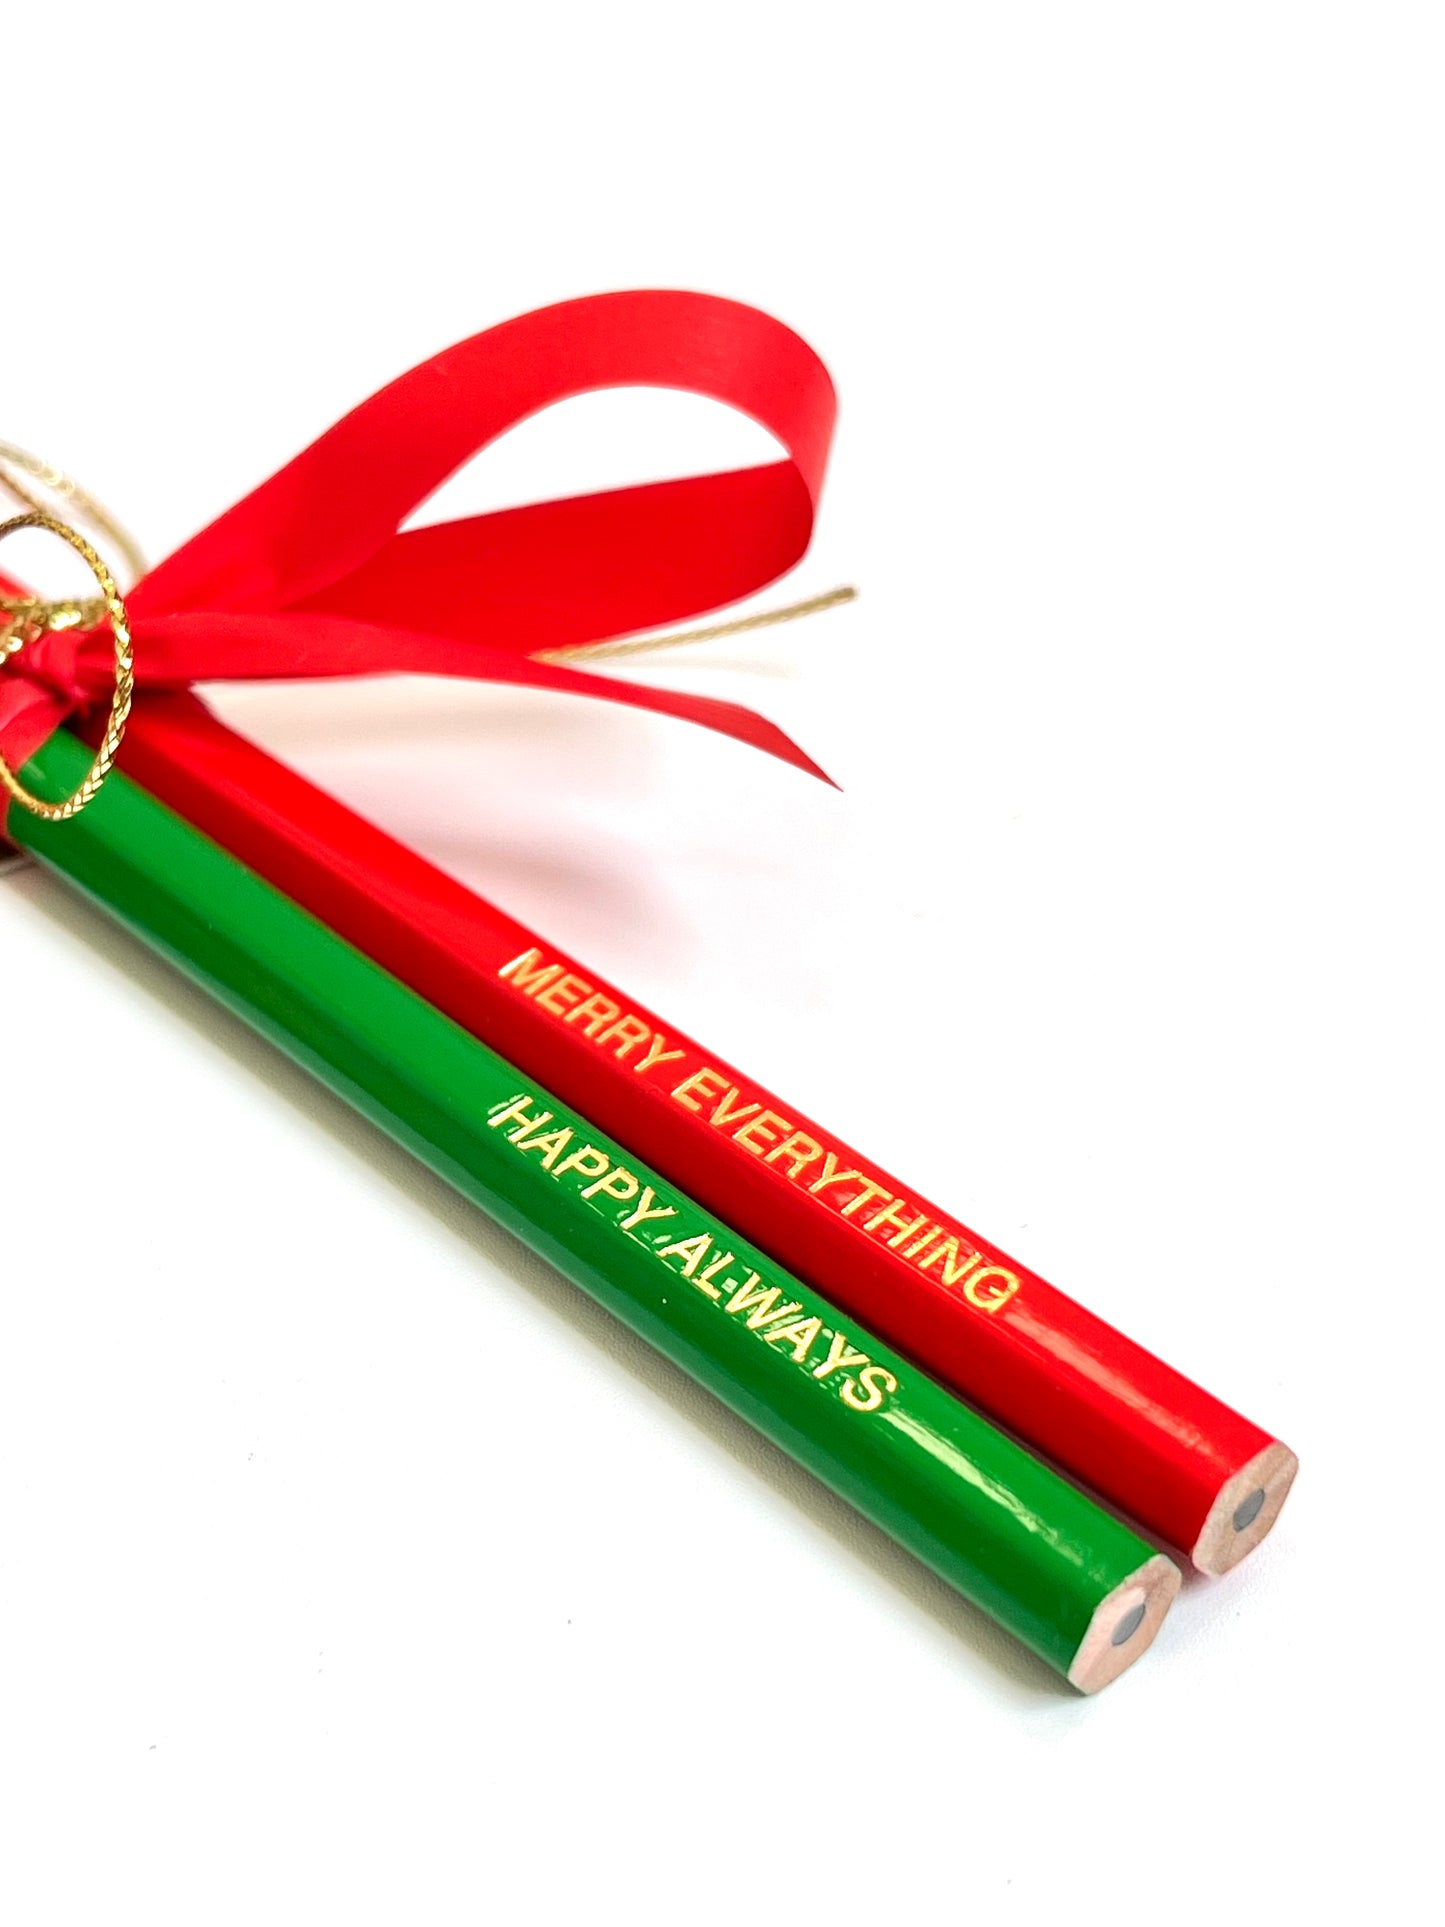 Pencil with a Point - "MERRY EVERYTHING"